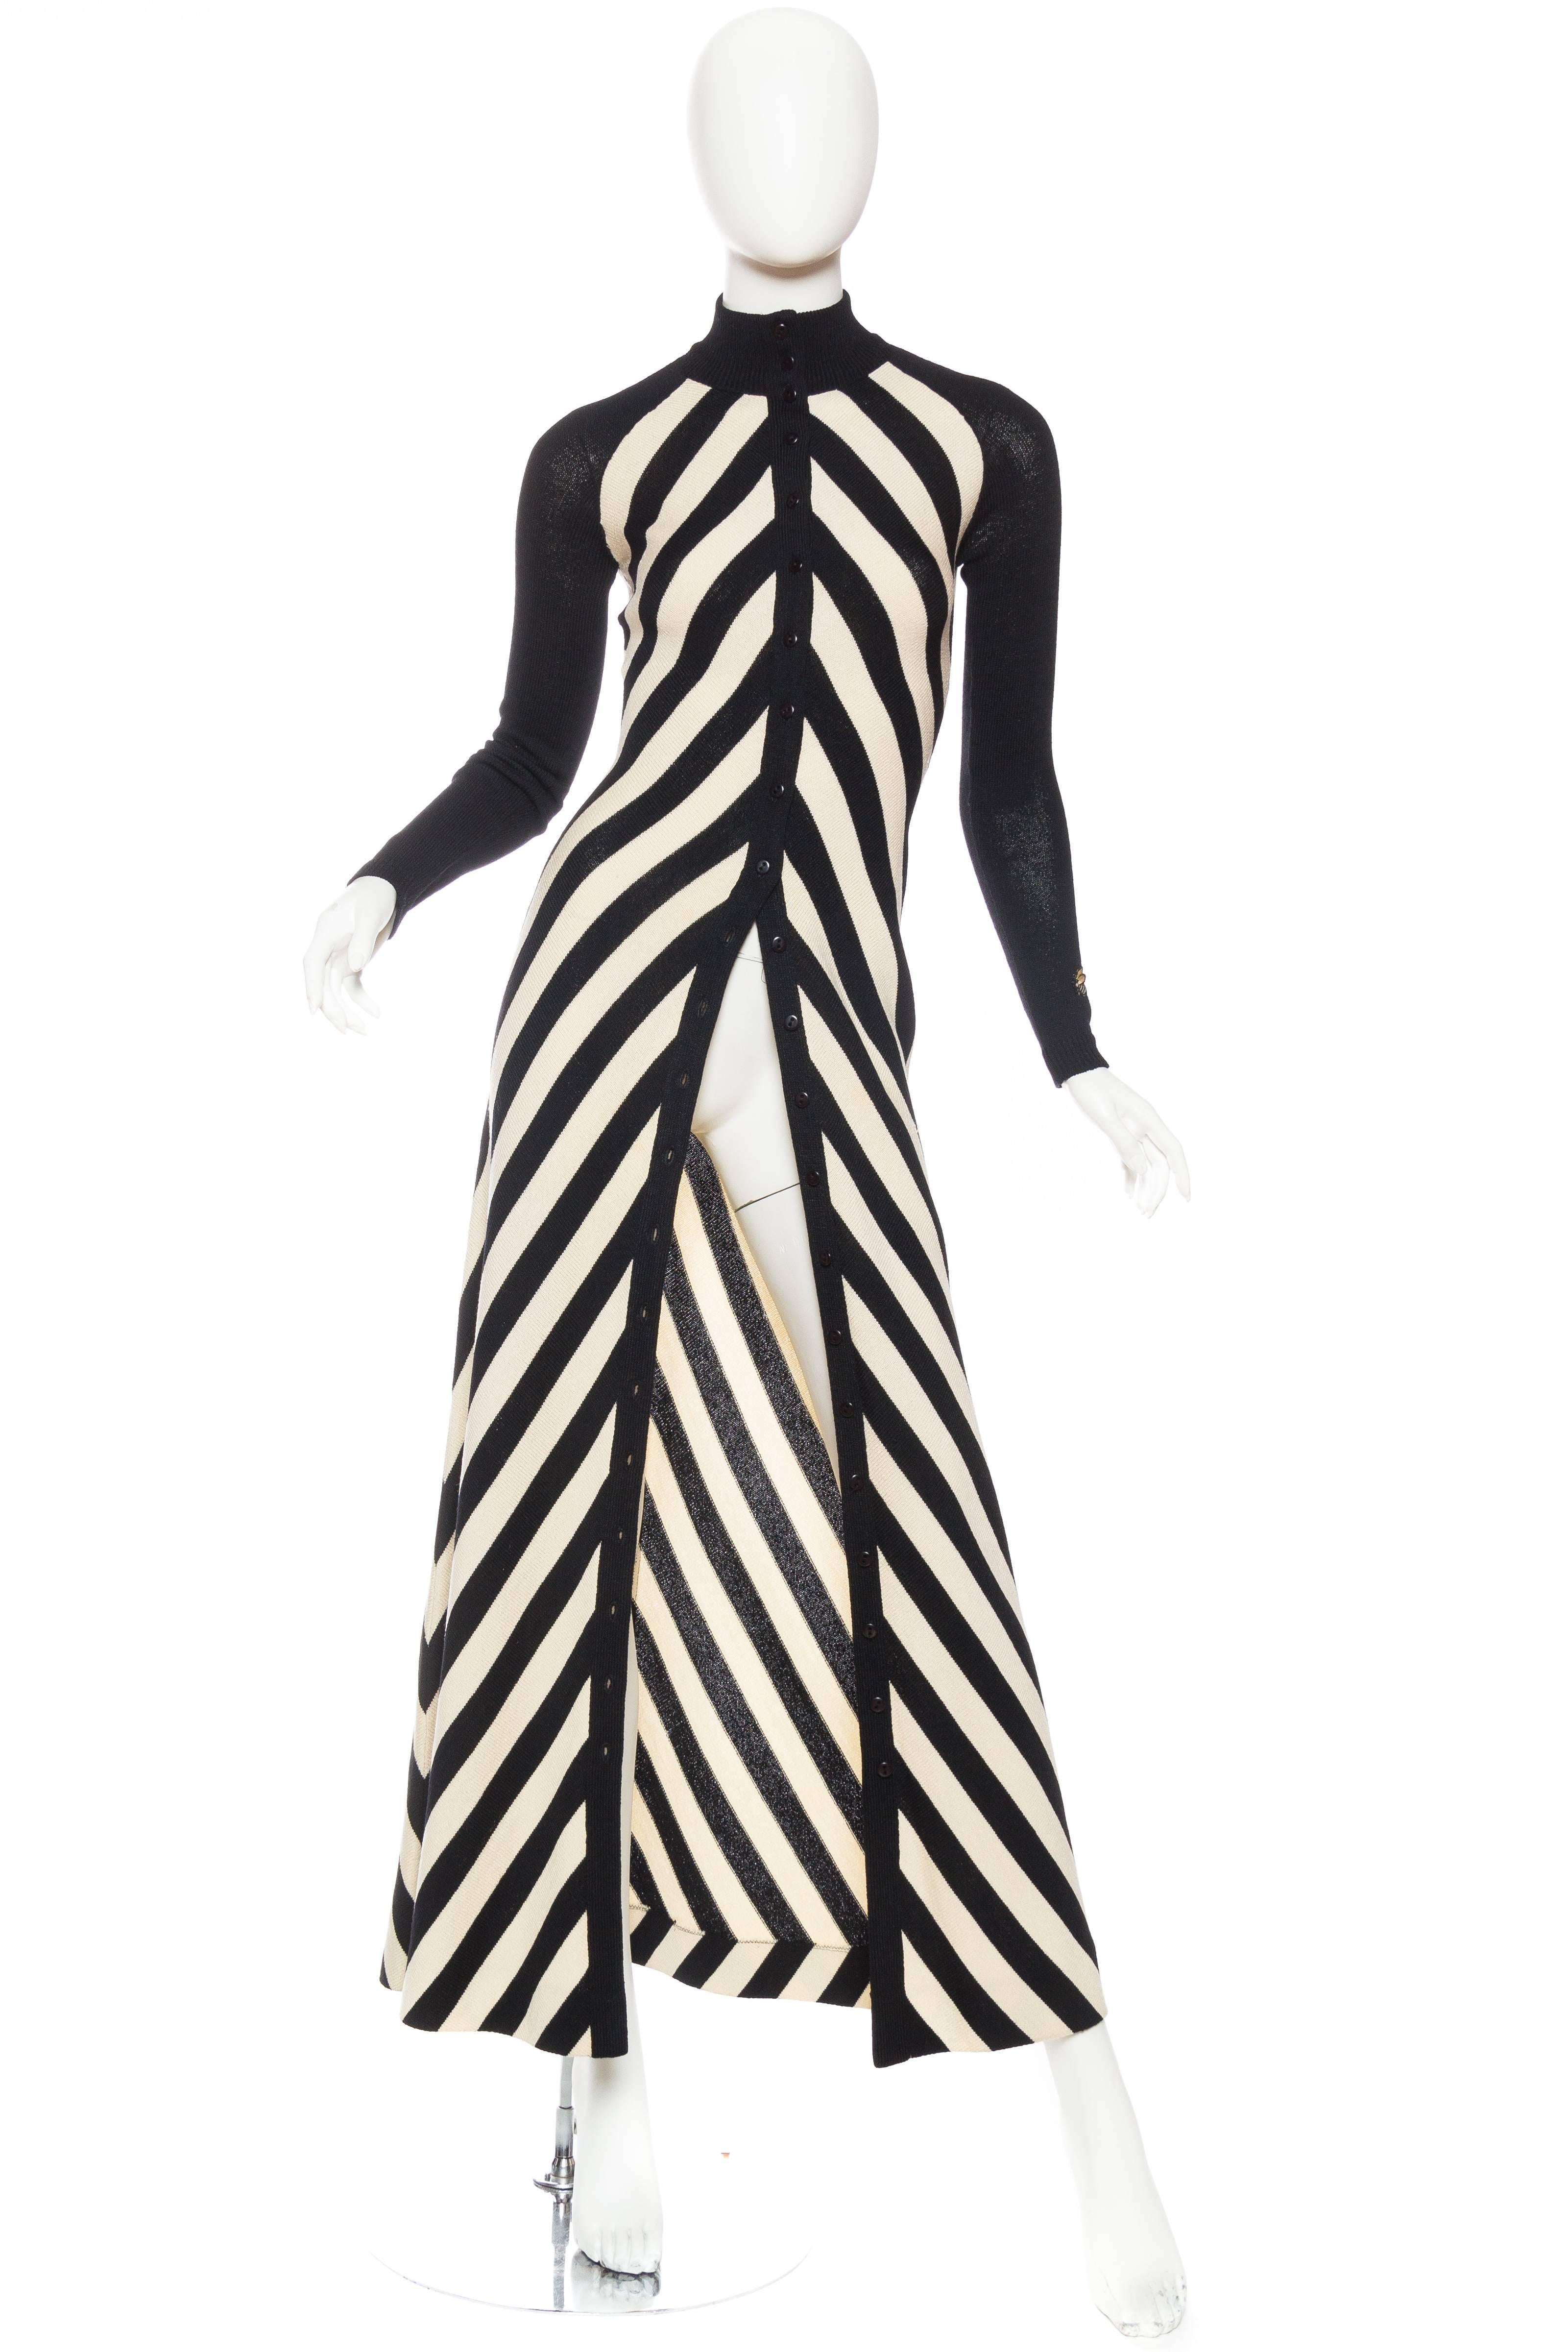 Black & White Op-Art Chevron Striped Maxi Sweater Cardigan with a cute bee stitched to one cuff.